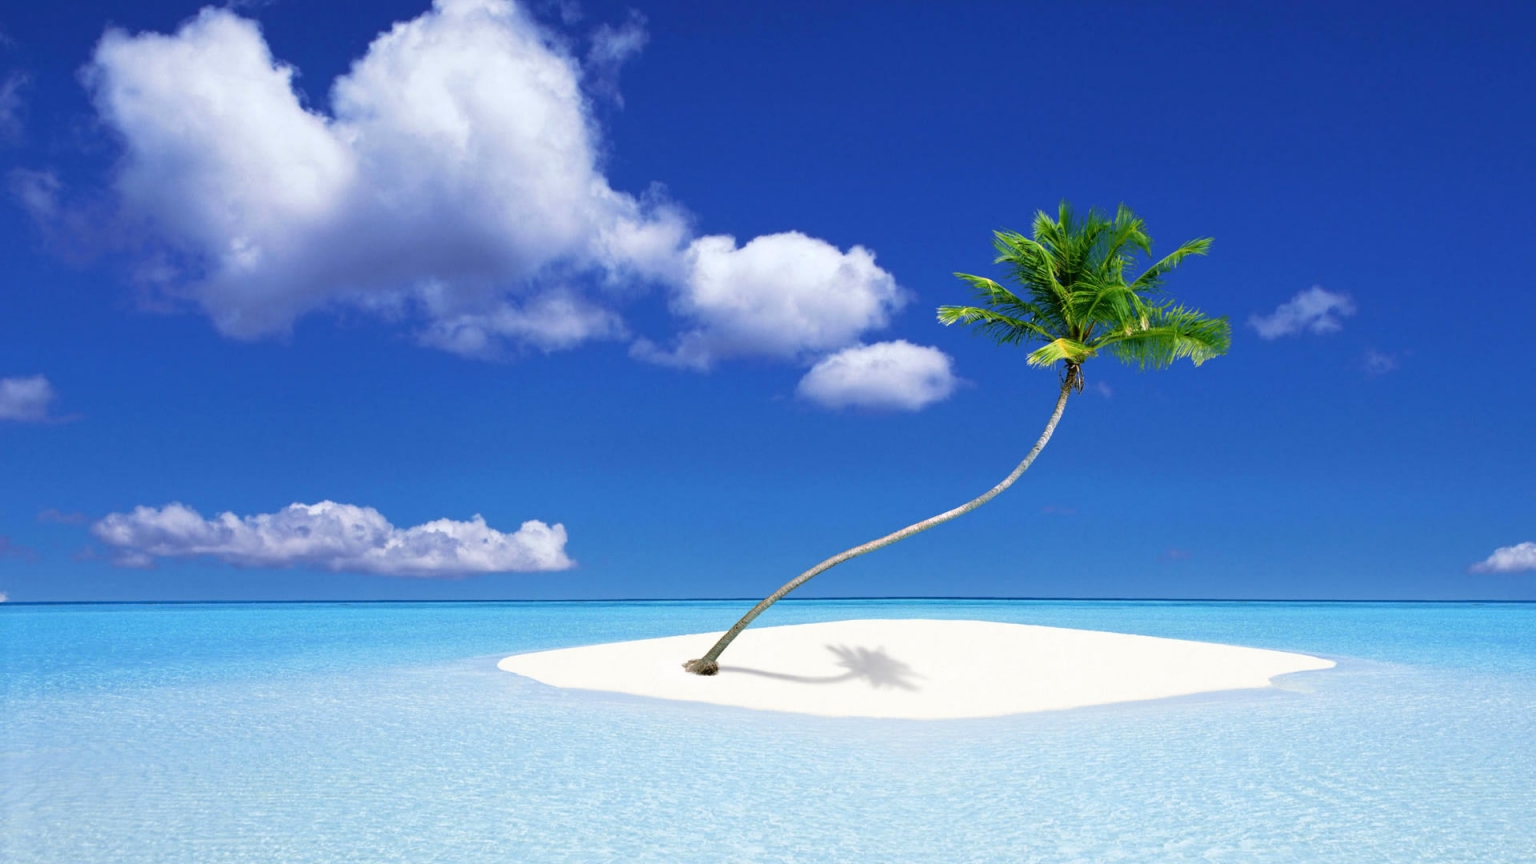 A Palm Tree Island for 1536 x 864 HDTV resolution